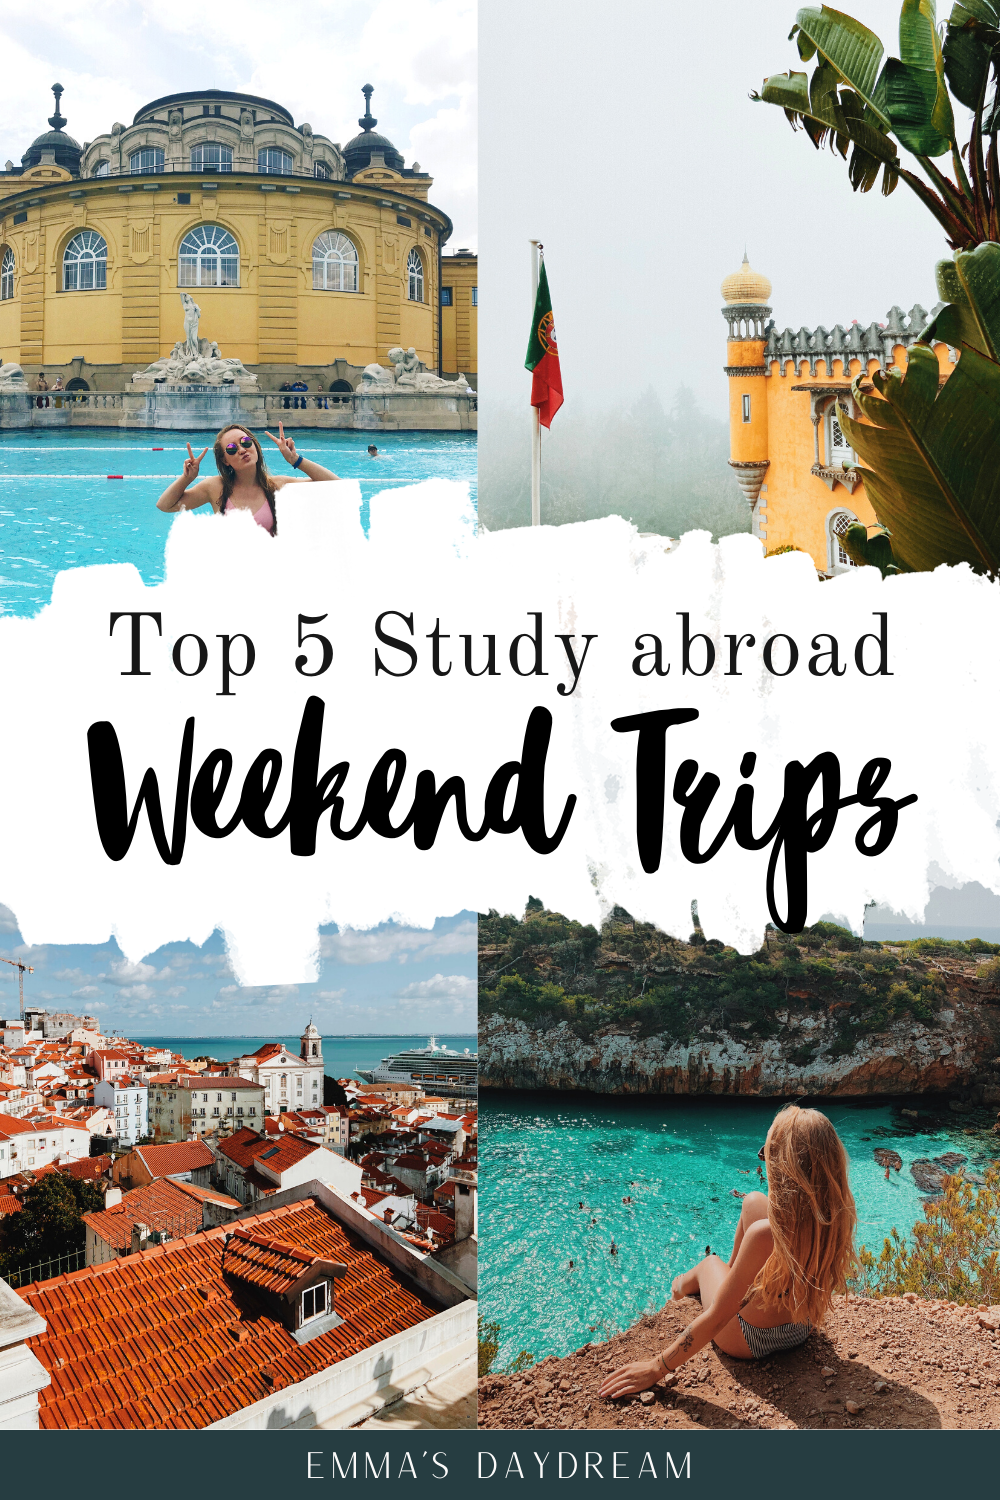 The Best 5 Places to Visit While Studying Abroad in Europe